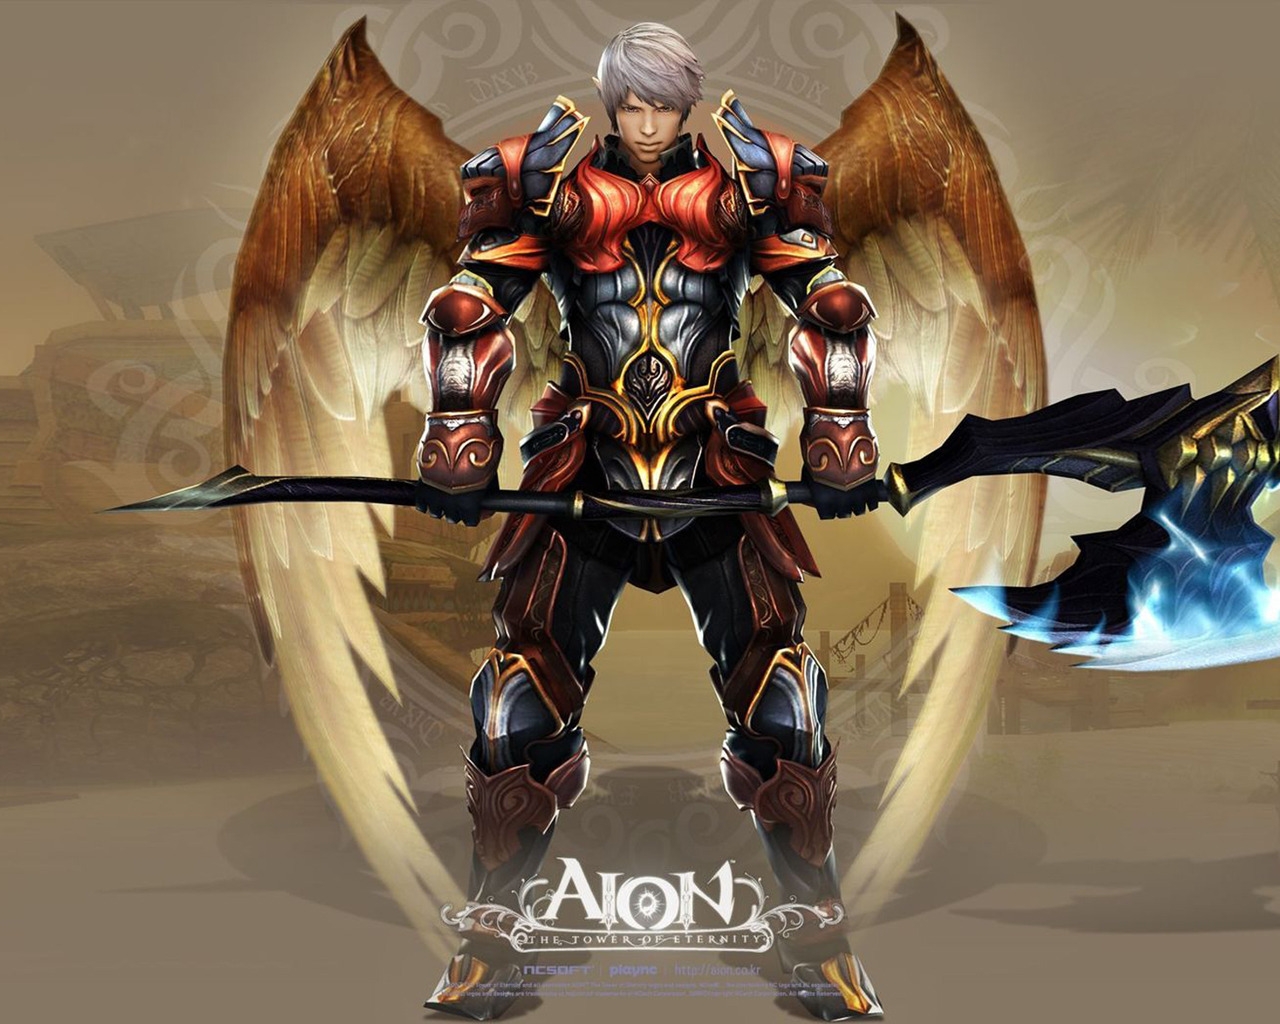 Aion for 1280 x 1024 resolution